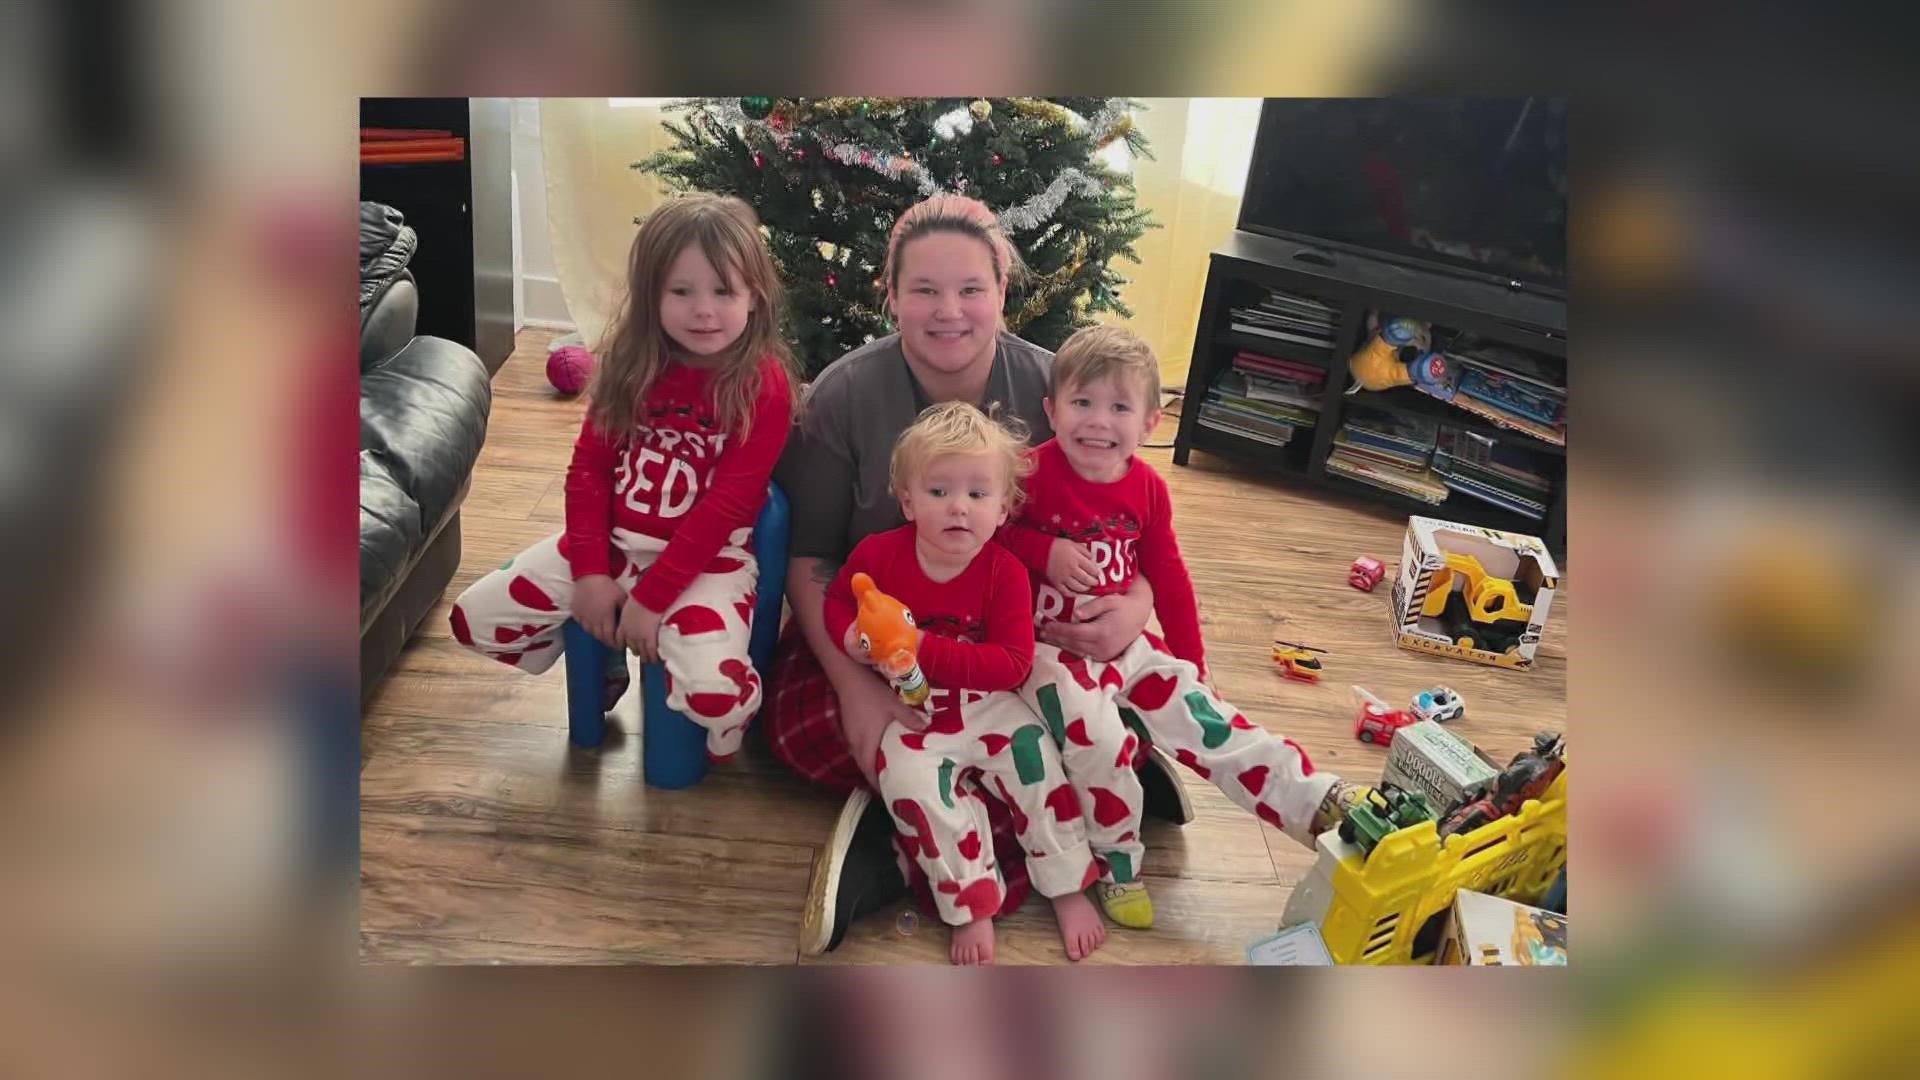 The kids were not in the home at the time of the fire, but the VFD said it destroyed everything inside the home -- including their Christmas gifts.